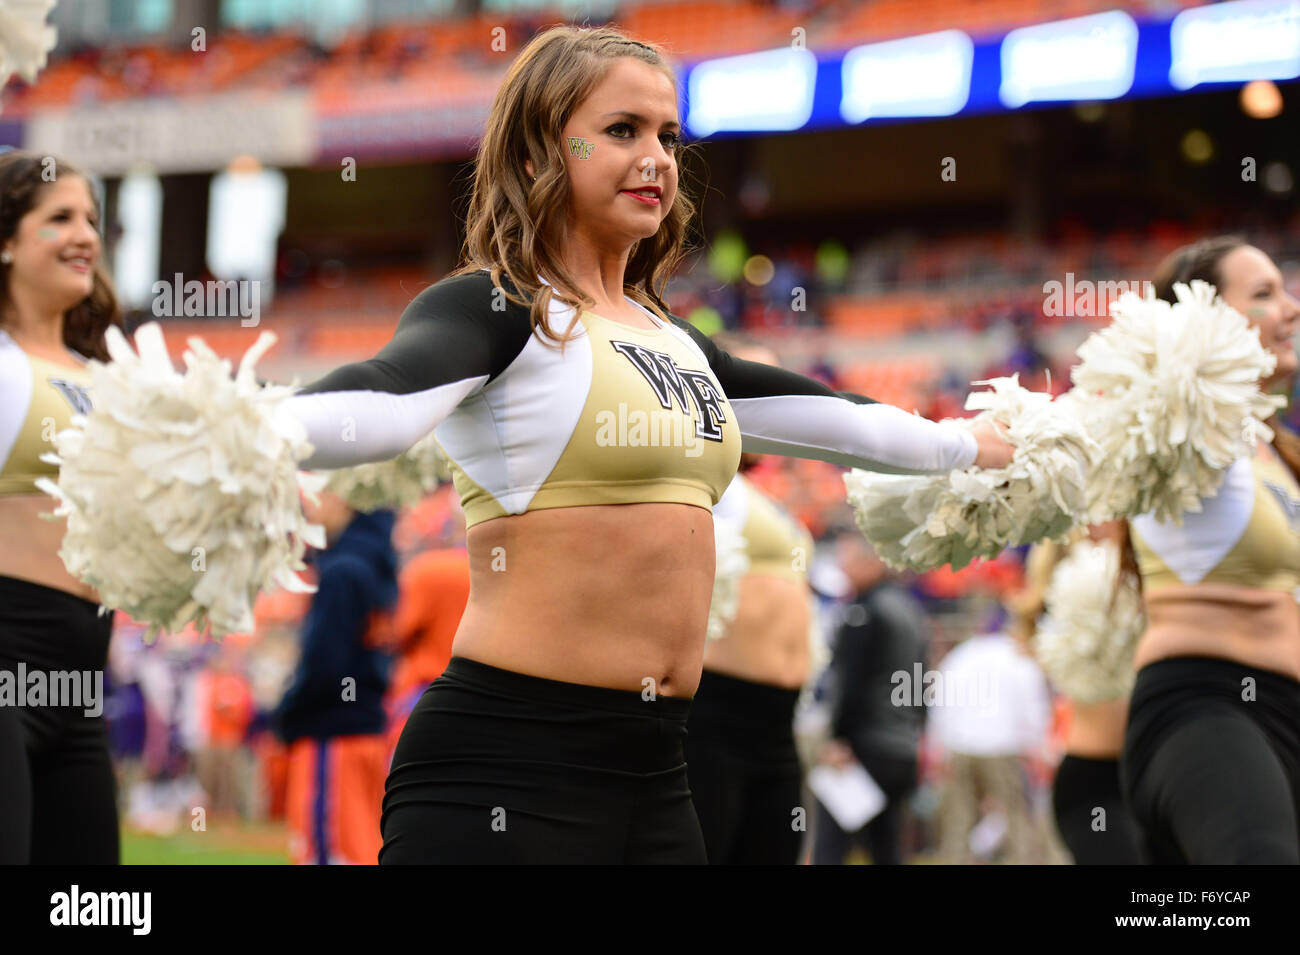 A Wake Forest Cheerleader During The Ncaa College Football Game Between